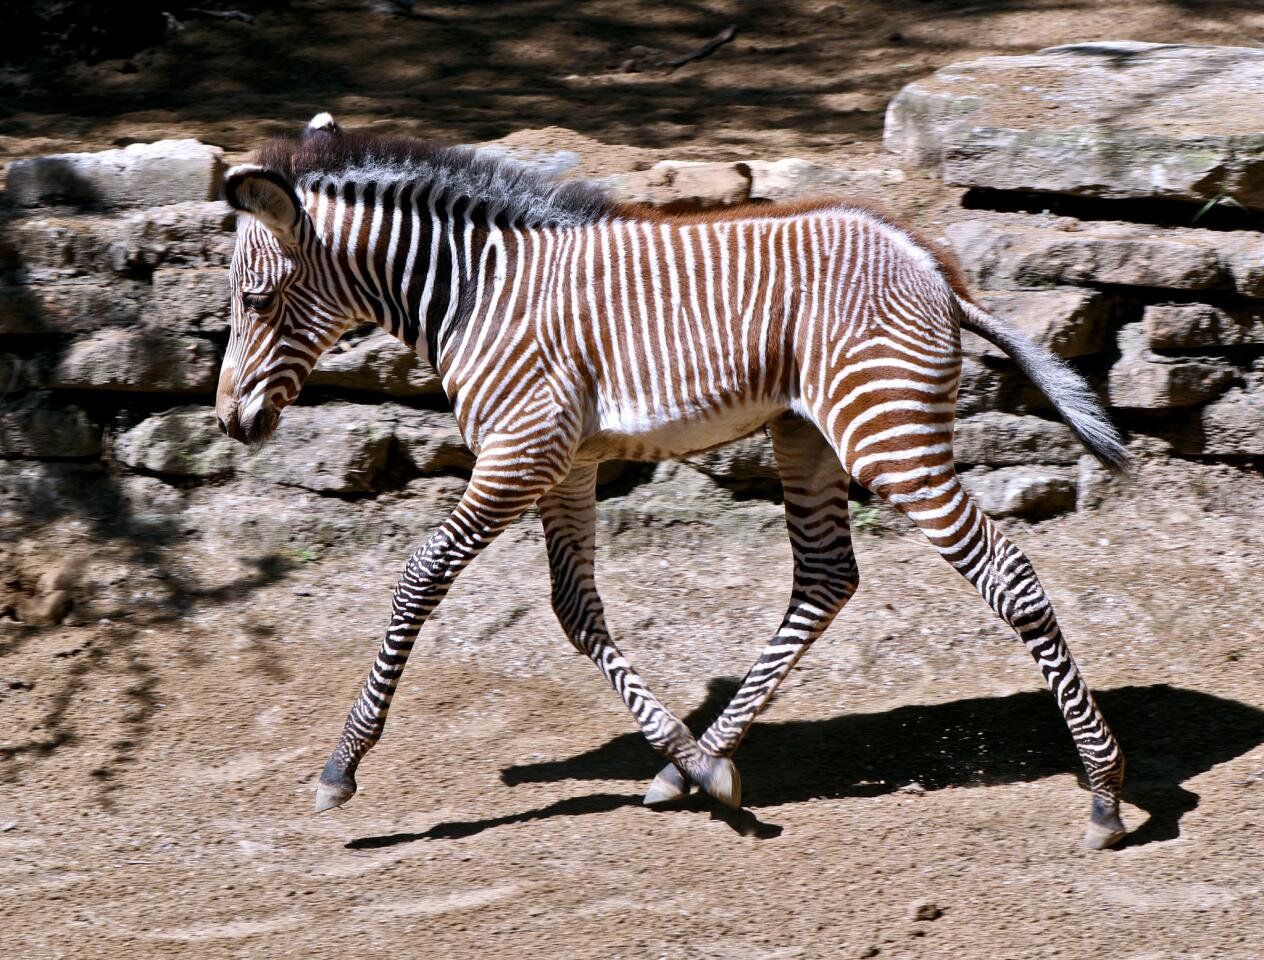 A three-week old Grevy's Zebra played in its enclosure, keeping close to the mother, at the Los Angeles Zoo on Tuesday, April 23, 2019. The unnamed female zebra, born April 2, is the first successful birth at the L.A. Zoo since 1988. The father is seven-year old Khalfani and the mother is five-year old Jamila.